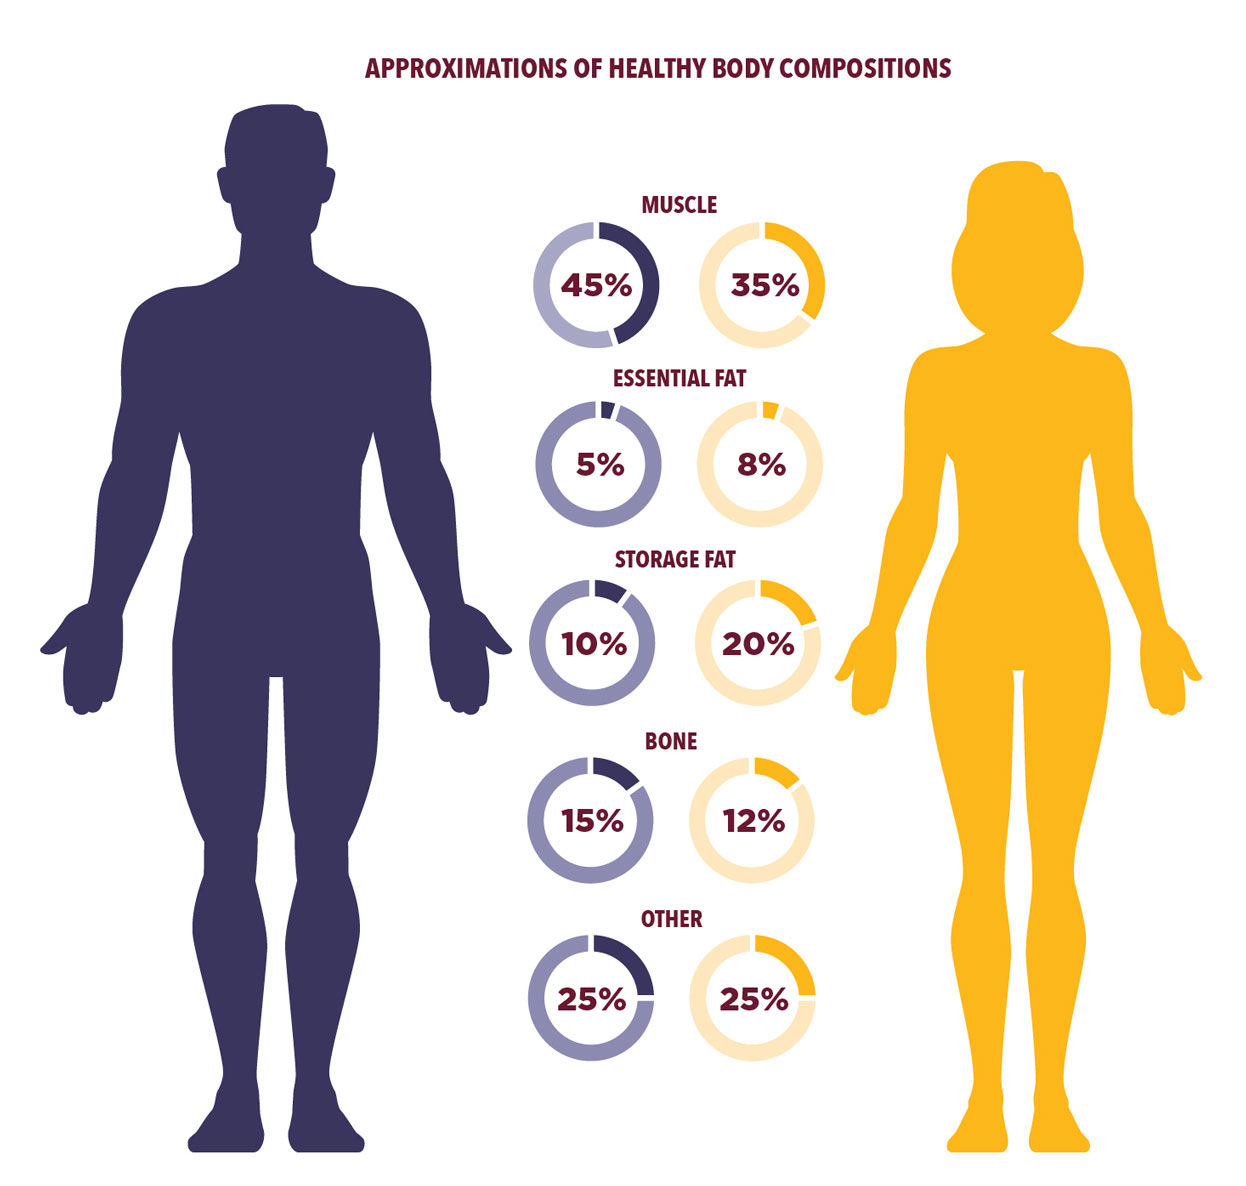 Approximations of healthy body compositions for males and females. Muscle for males is 45 percent and 35 percent for females. Essential fat is 5 percent for males and 8 percent for females. Storage fat is 10 percent for males and 20 percent for females. Bone is 15 percent for males and 12 percent for females. Other components of body composition for both males and females is 25 percent.